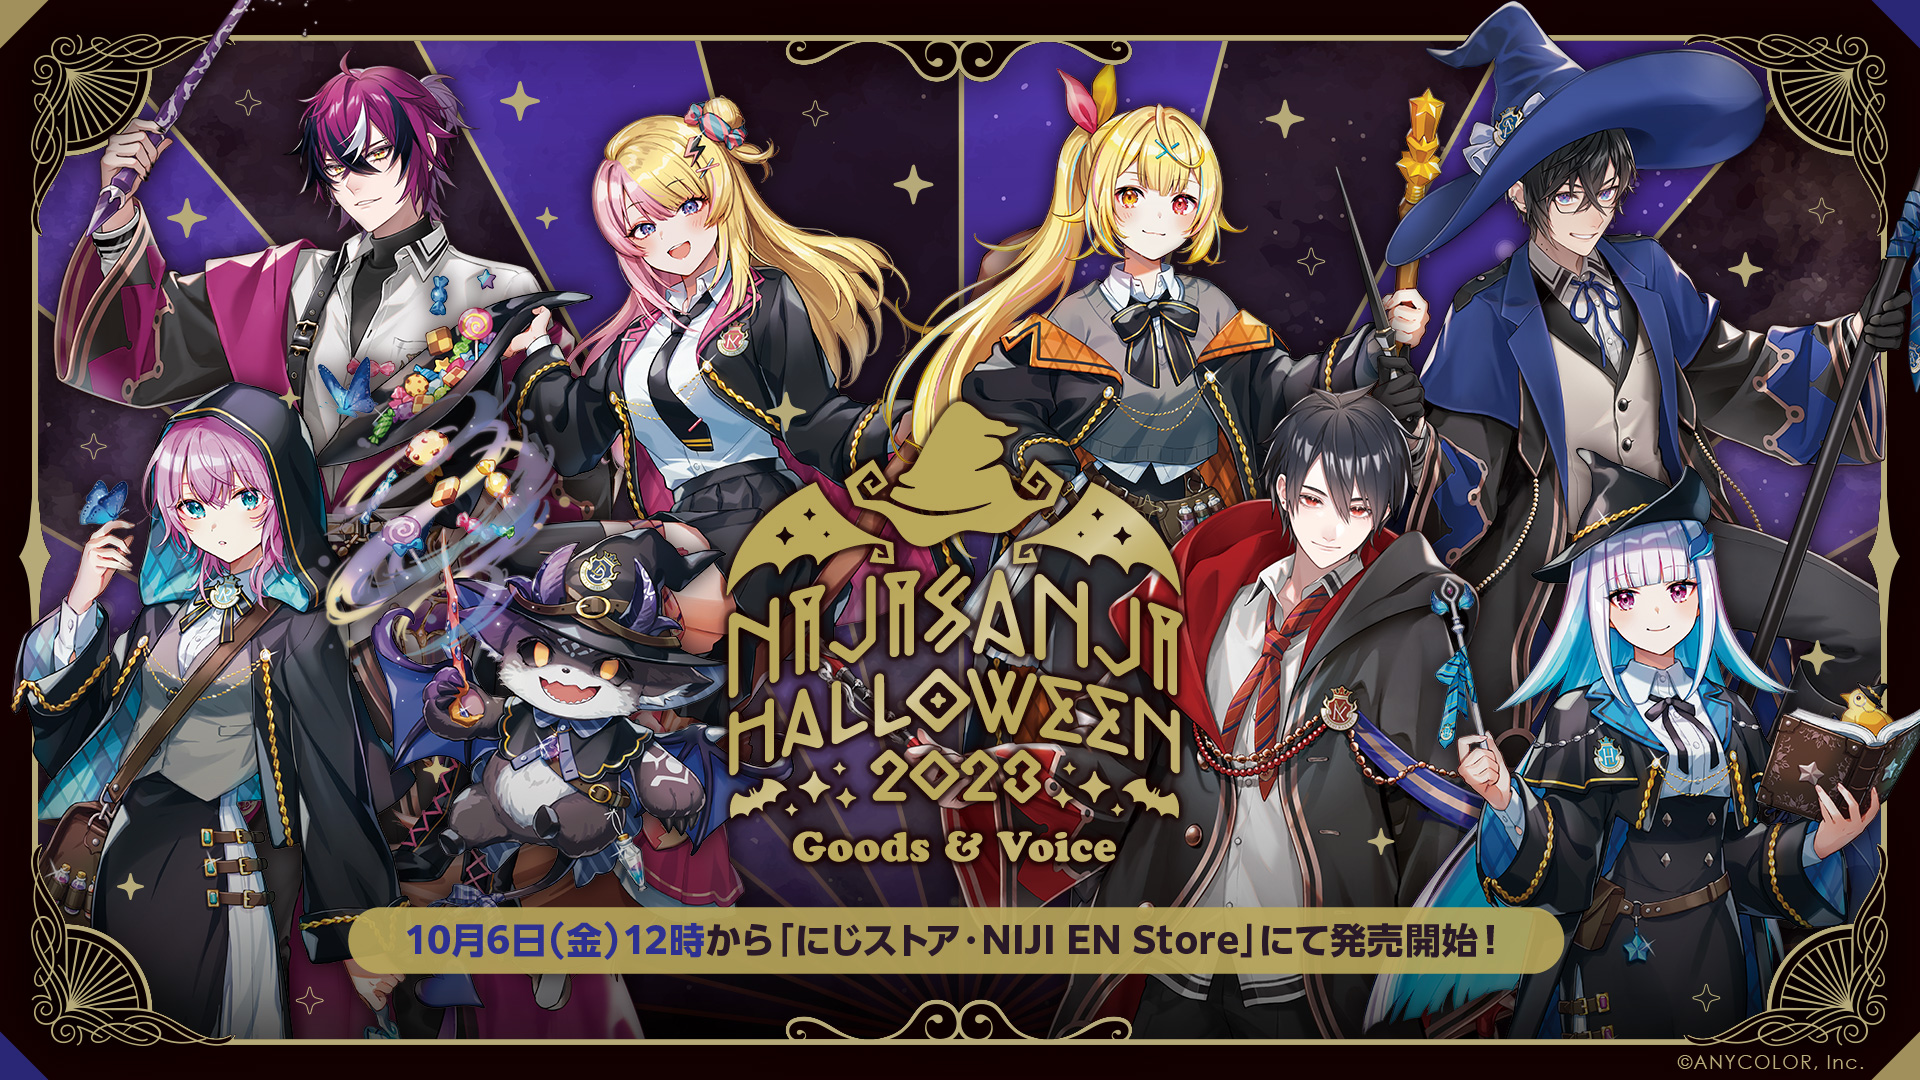 Nijisanji Releases Exciting Halloween-Themed Goods and Voices for 2023!